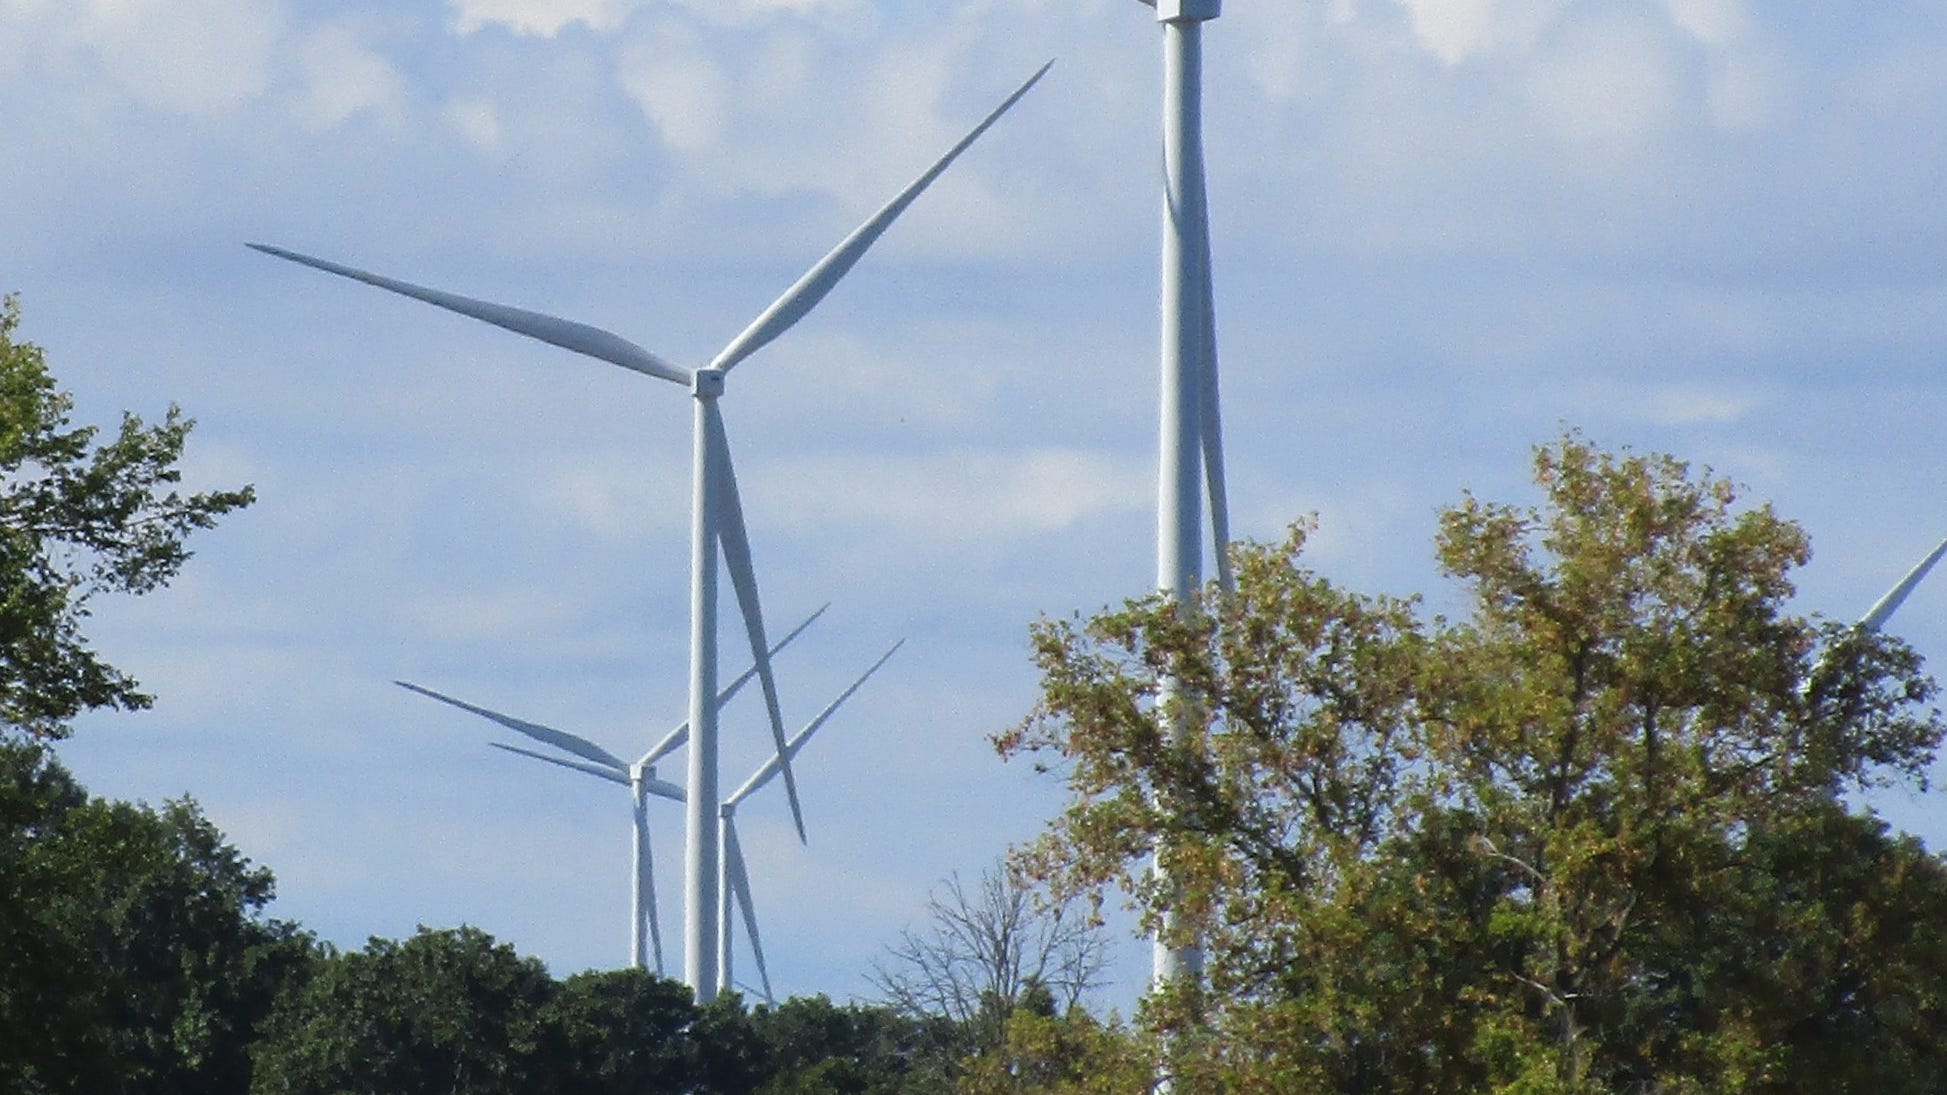 Is industrial wind development right for Crawford County? Voters will decide on Nov. 8